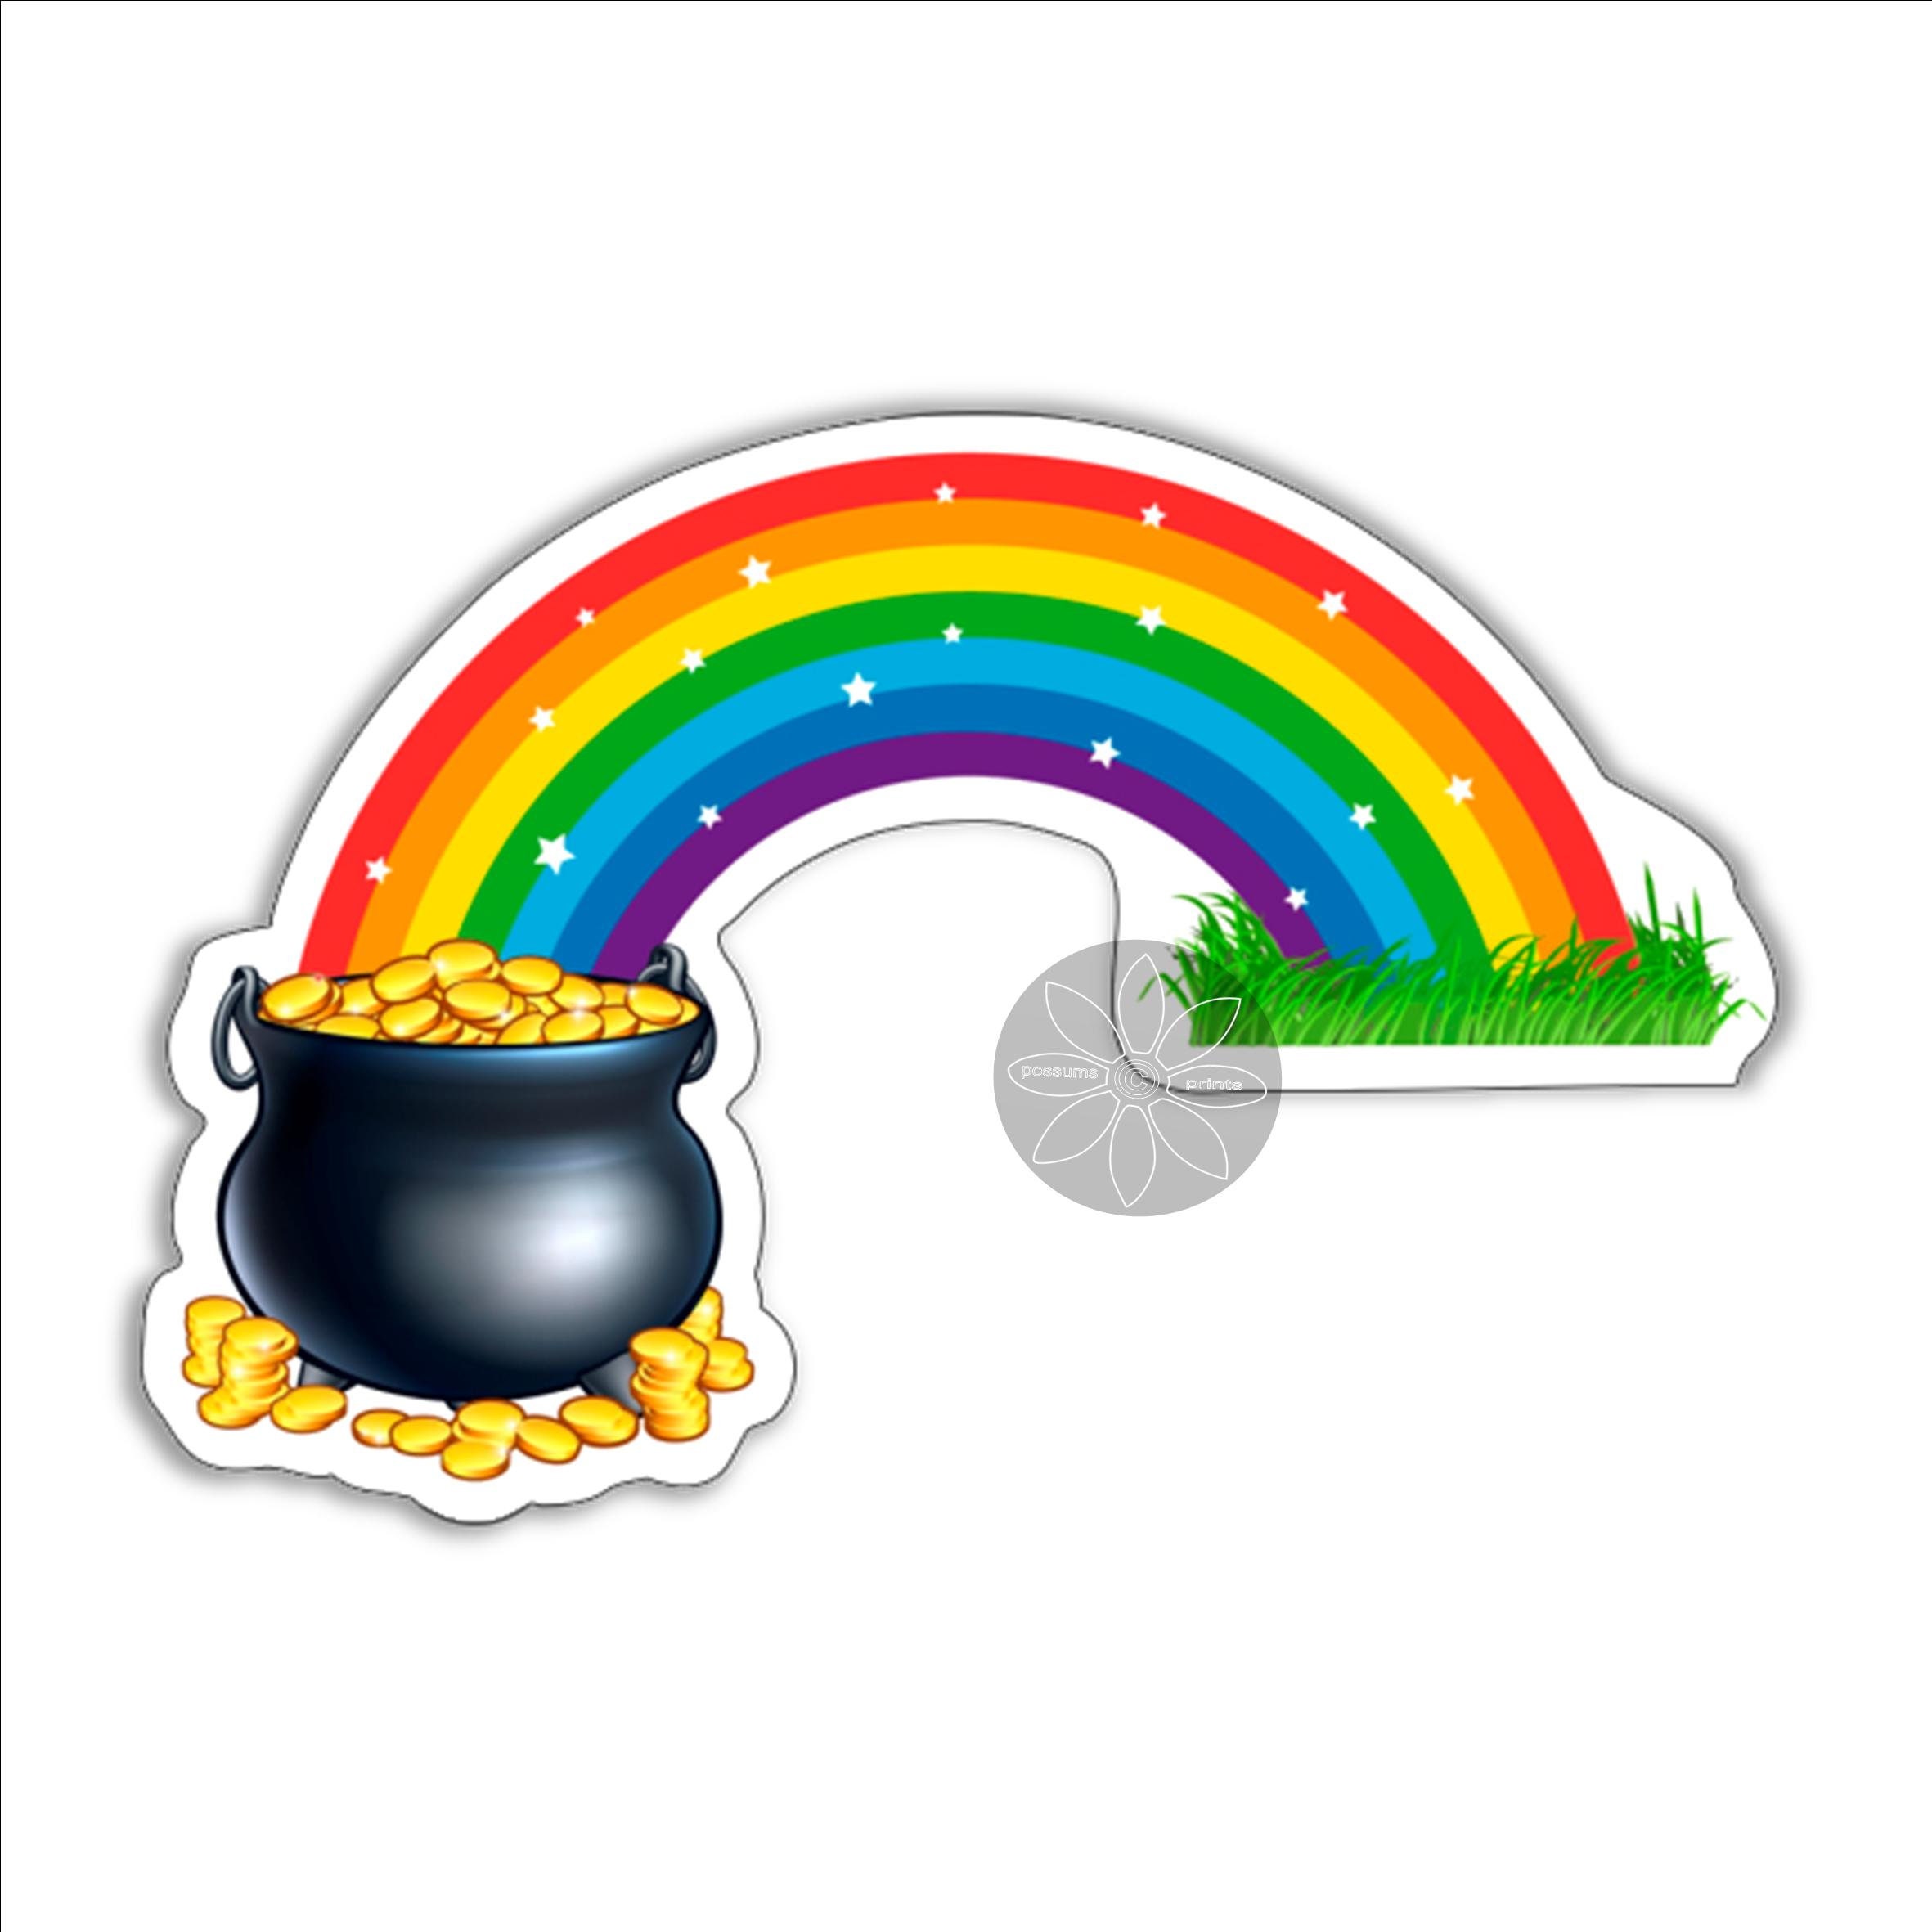 The End of the Rainbow Bumper Sticker